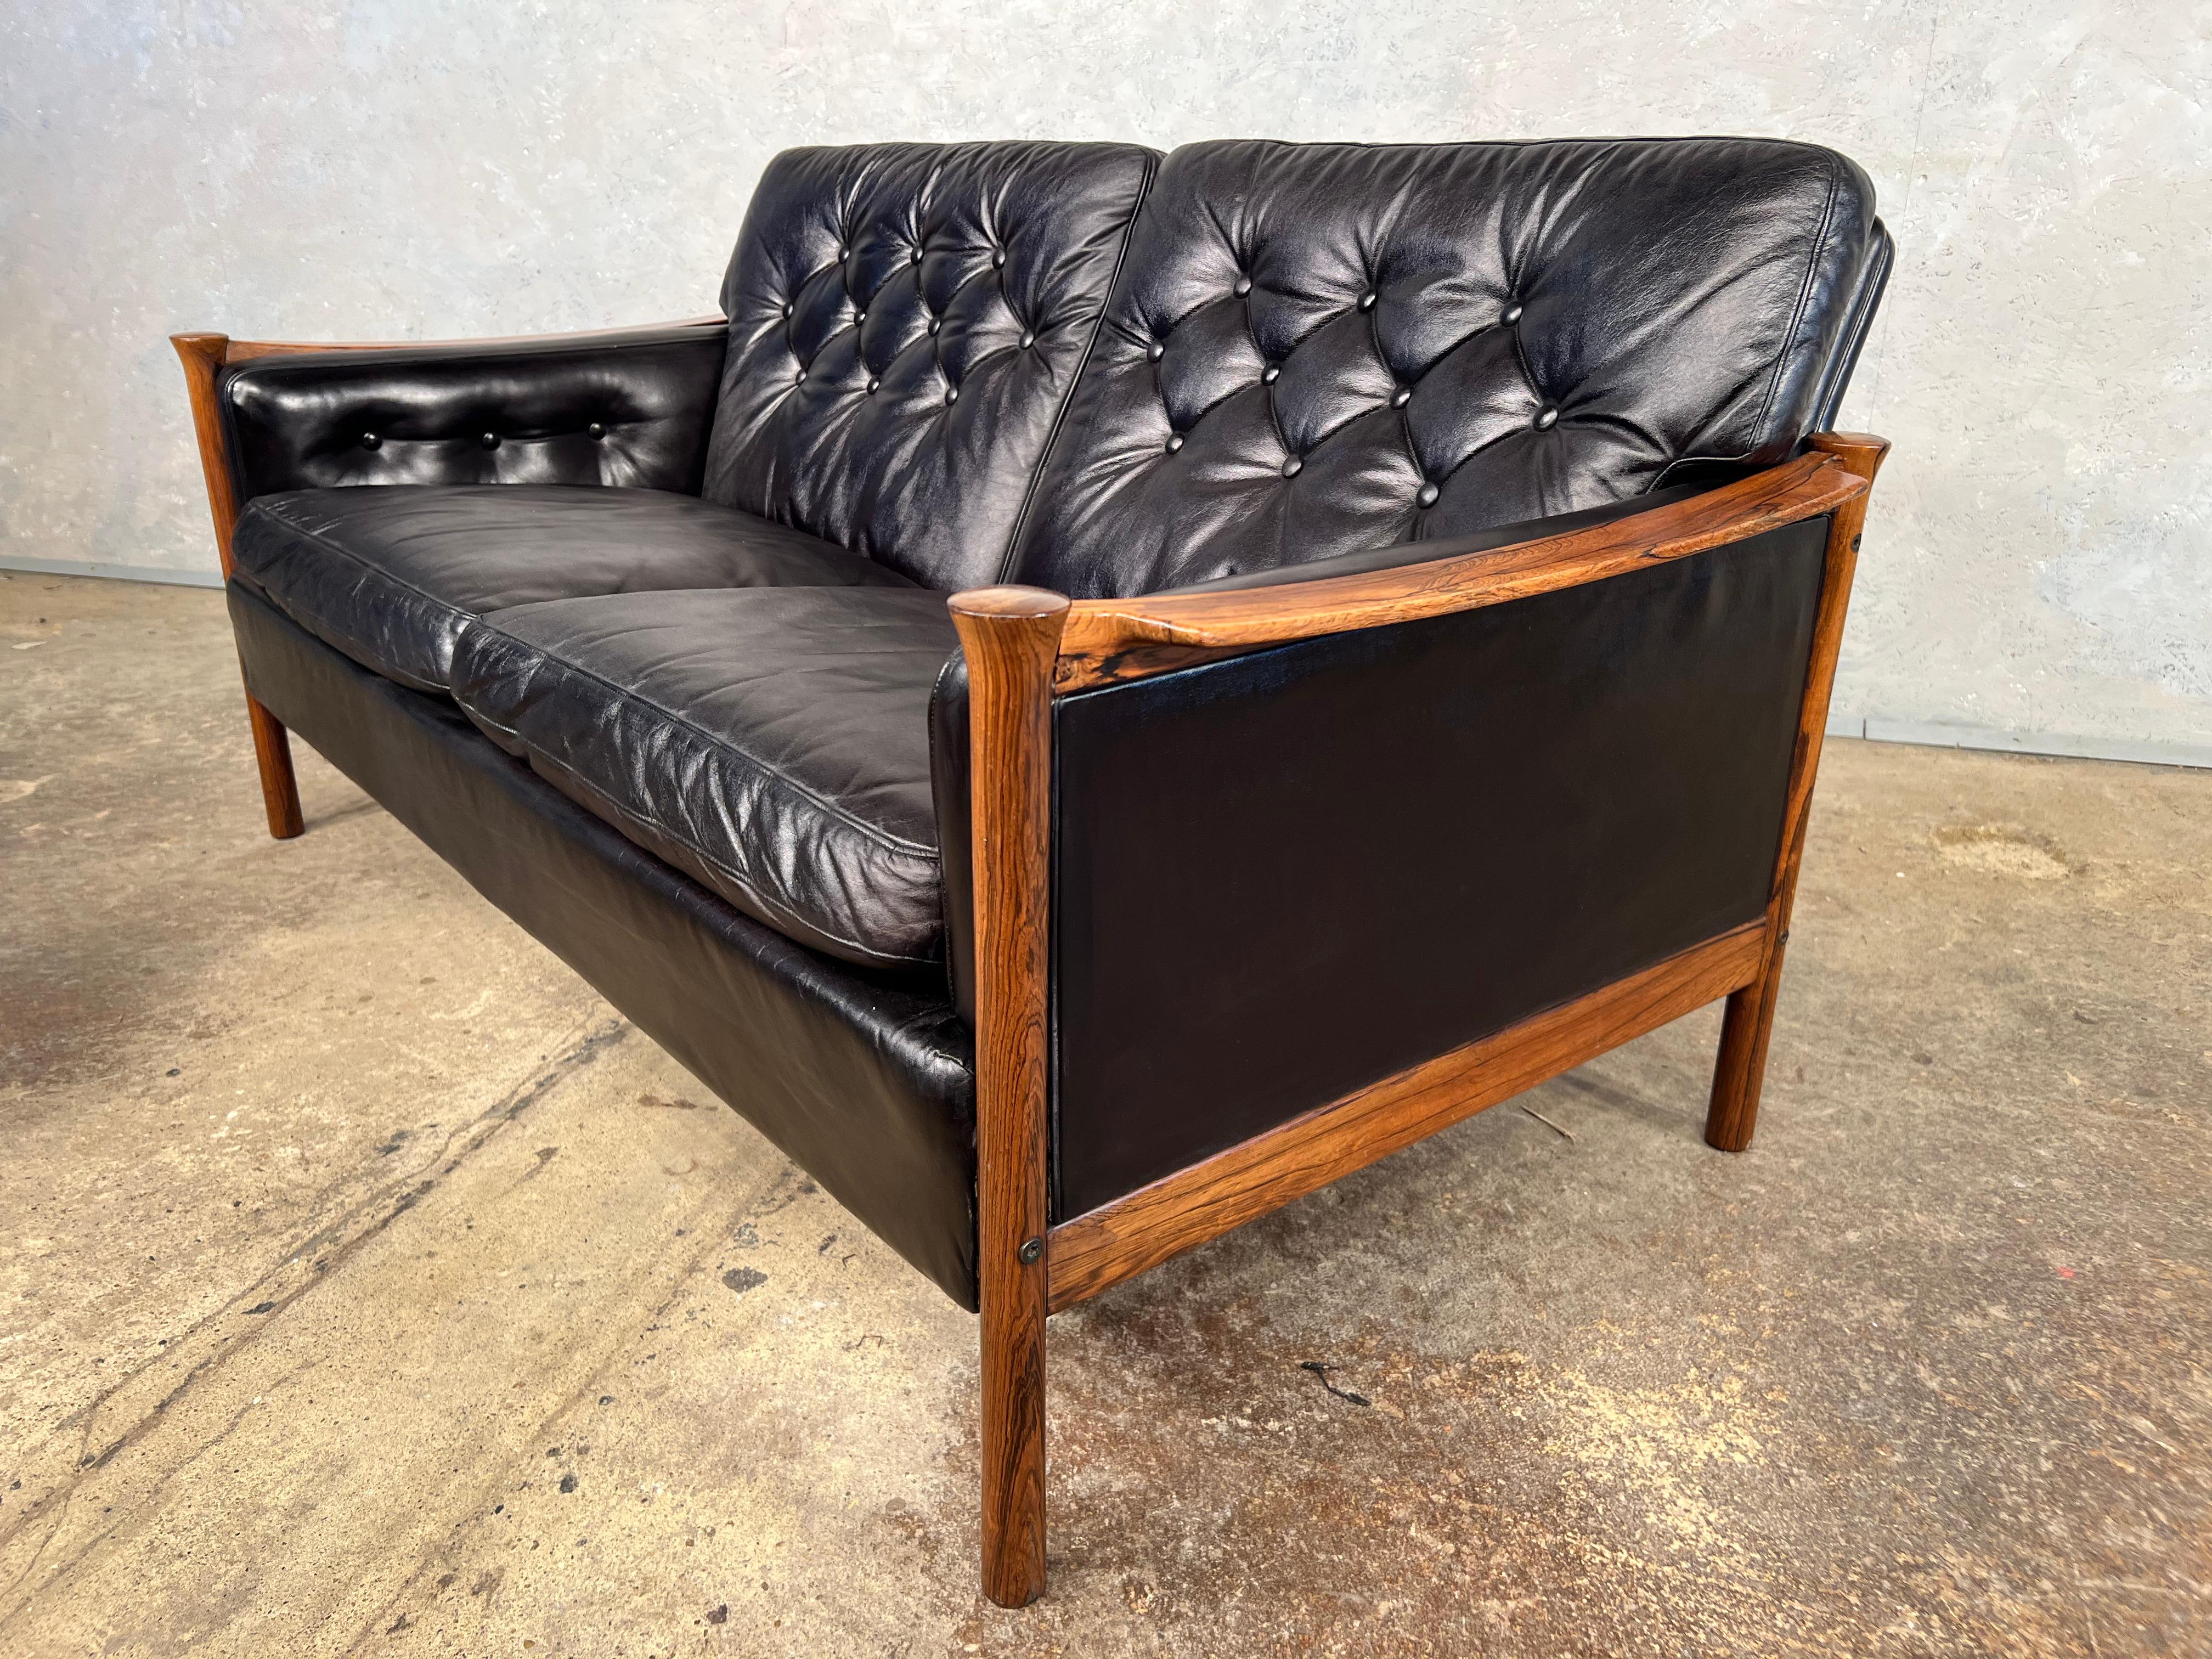 V Neat Two Seater Sofa in Leather by Torbjørn Afdal for Bruksbo Norway 70s #515 For Sale 3